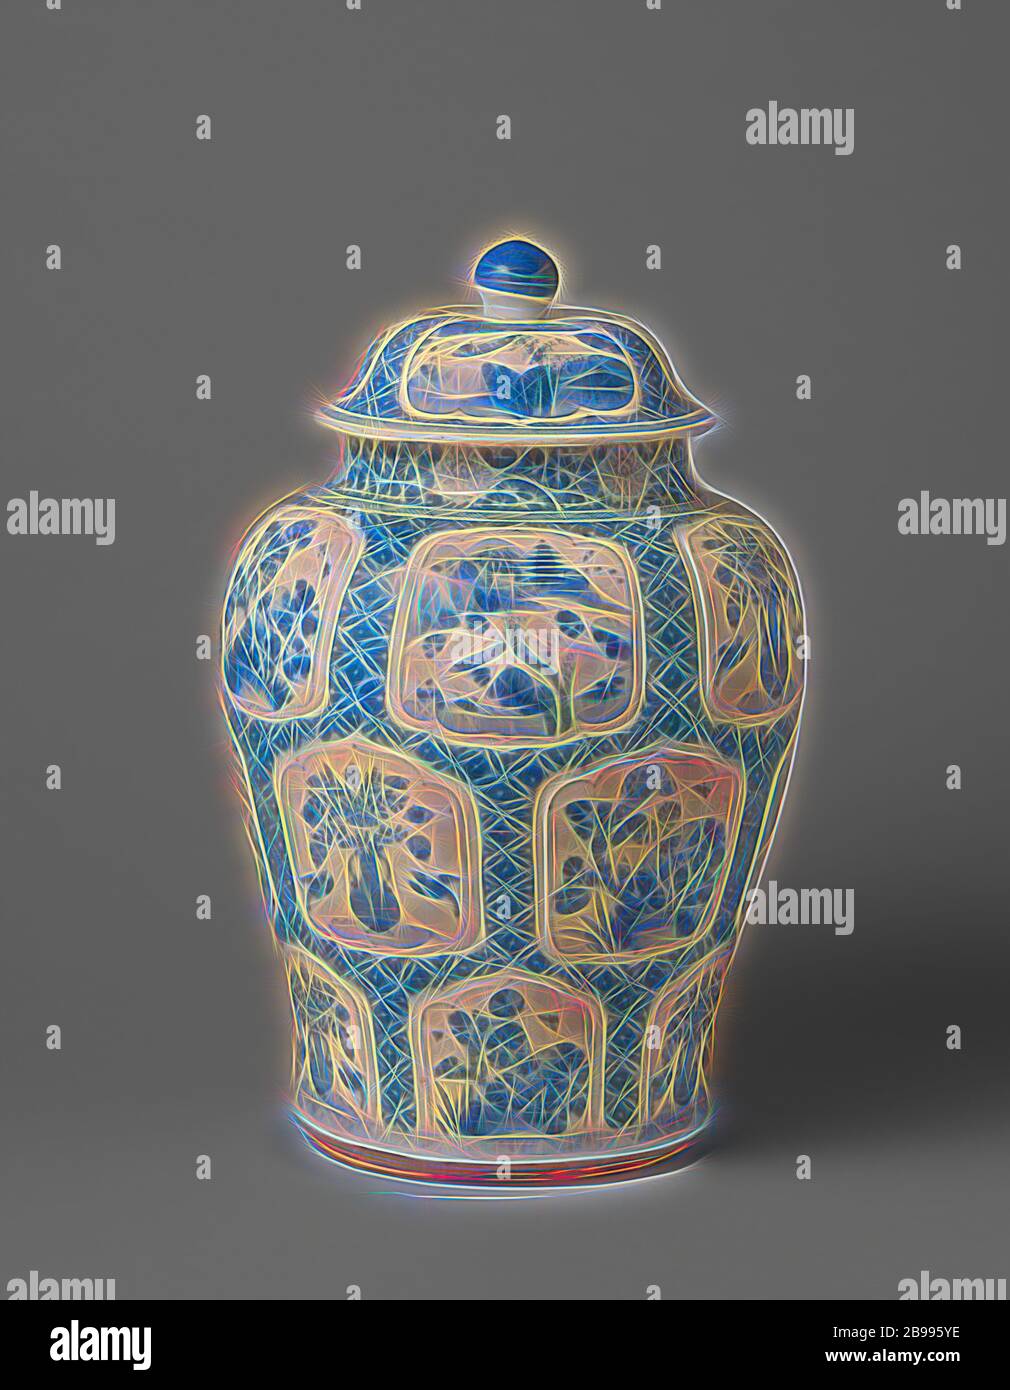 Baluster covered jar with flower vases, flowering plants and landscapes in panels, Baluster-shaped porcelain covered pot, painted in underglaze blue. The belly is covered with napkin work containing saved, modeled, scalloped cartouches with a flower vase (lotus) with two birds, flowering plants (peony) near a rock or a river cap with two people, a boat, pavilions, trees and mountains. The neck with stylized lotus tendrils. On the shoulder and around the foot a band with hatching. The lid with the same decoration. Blue White., anonymous, China, c. 1680 - c. 1720, Kangxi-period (1662-1722), porc Stock Photo